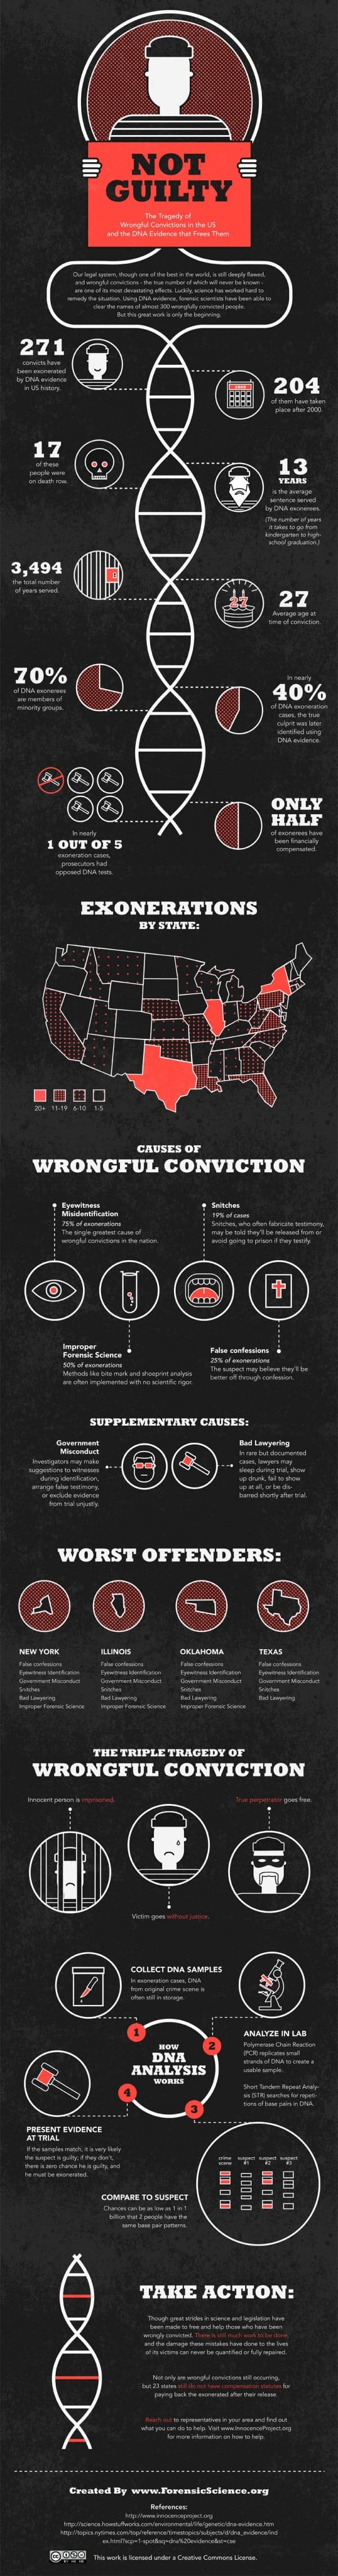 Imperfections of the U.S. Judicial System